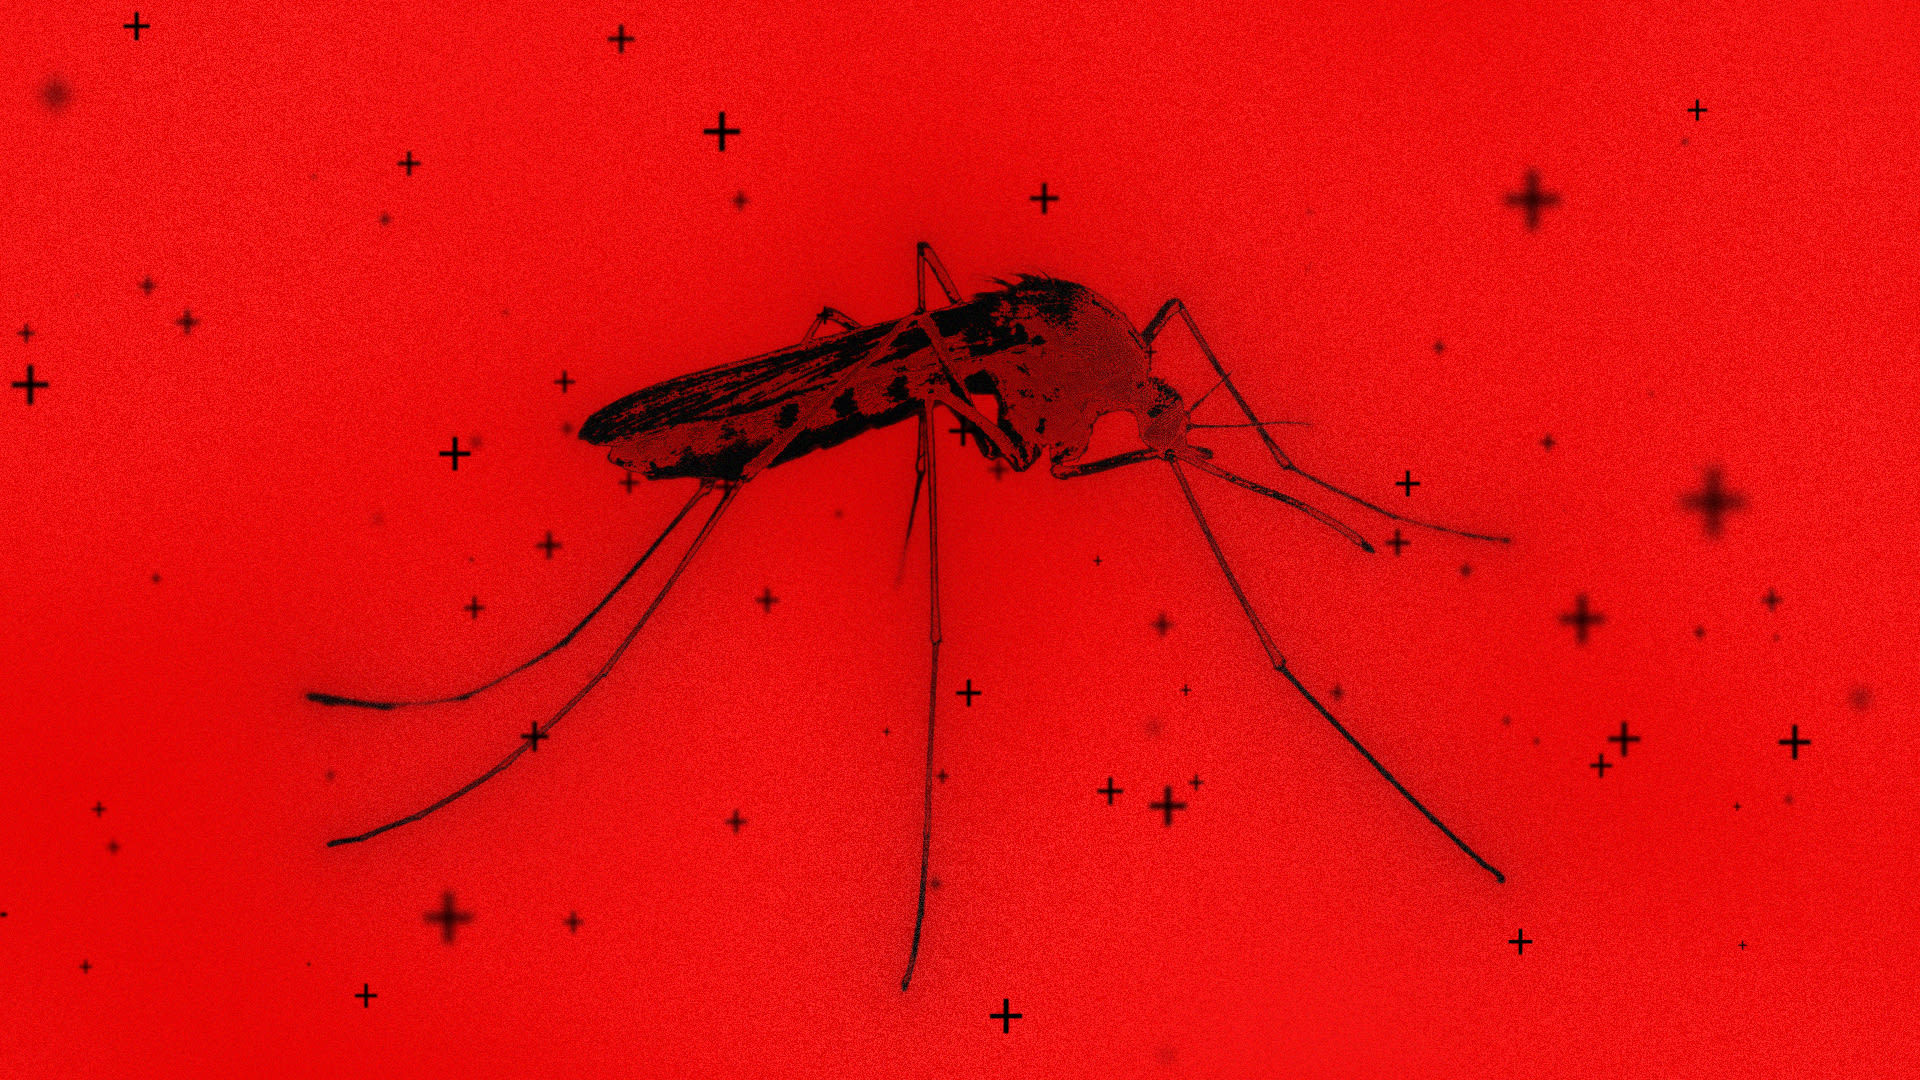 The West Nile virus is detected in Houston and other parts of the U.S. Should you be worried about mosquito-borne illnesses?